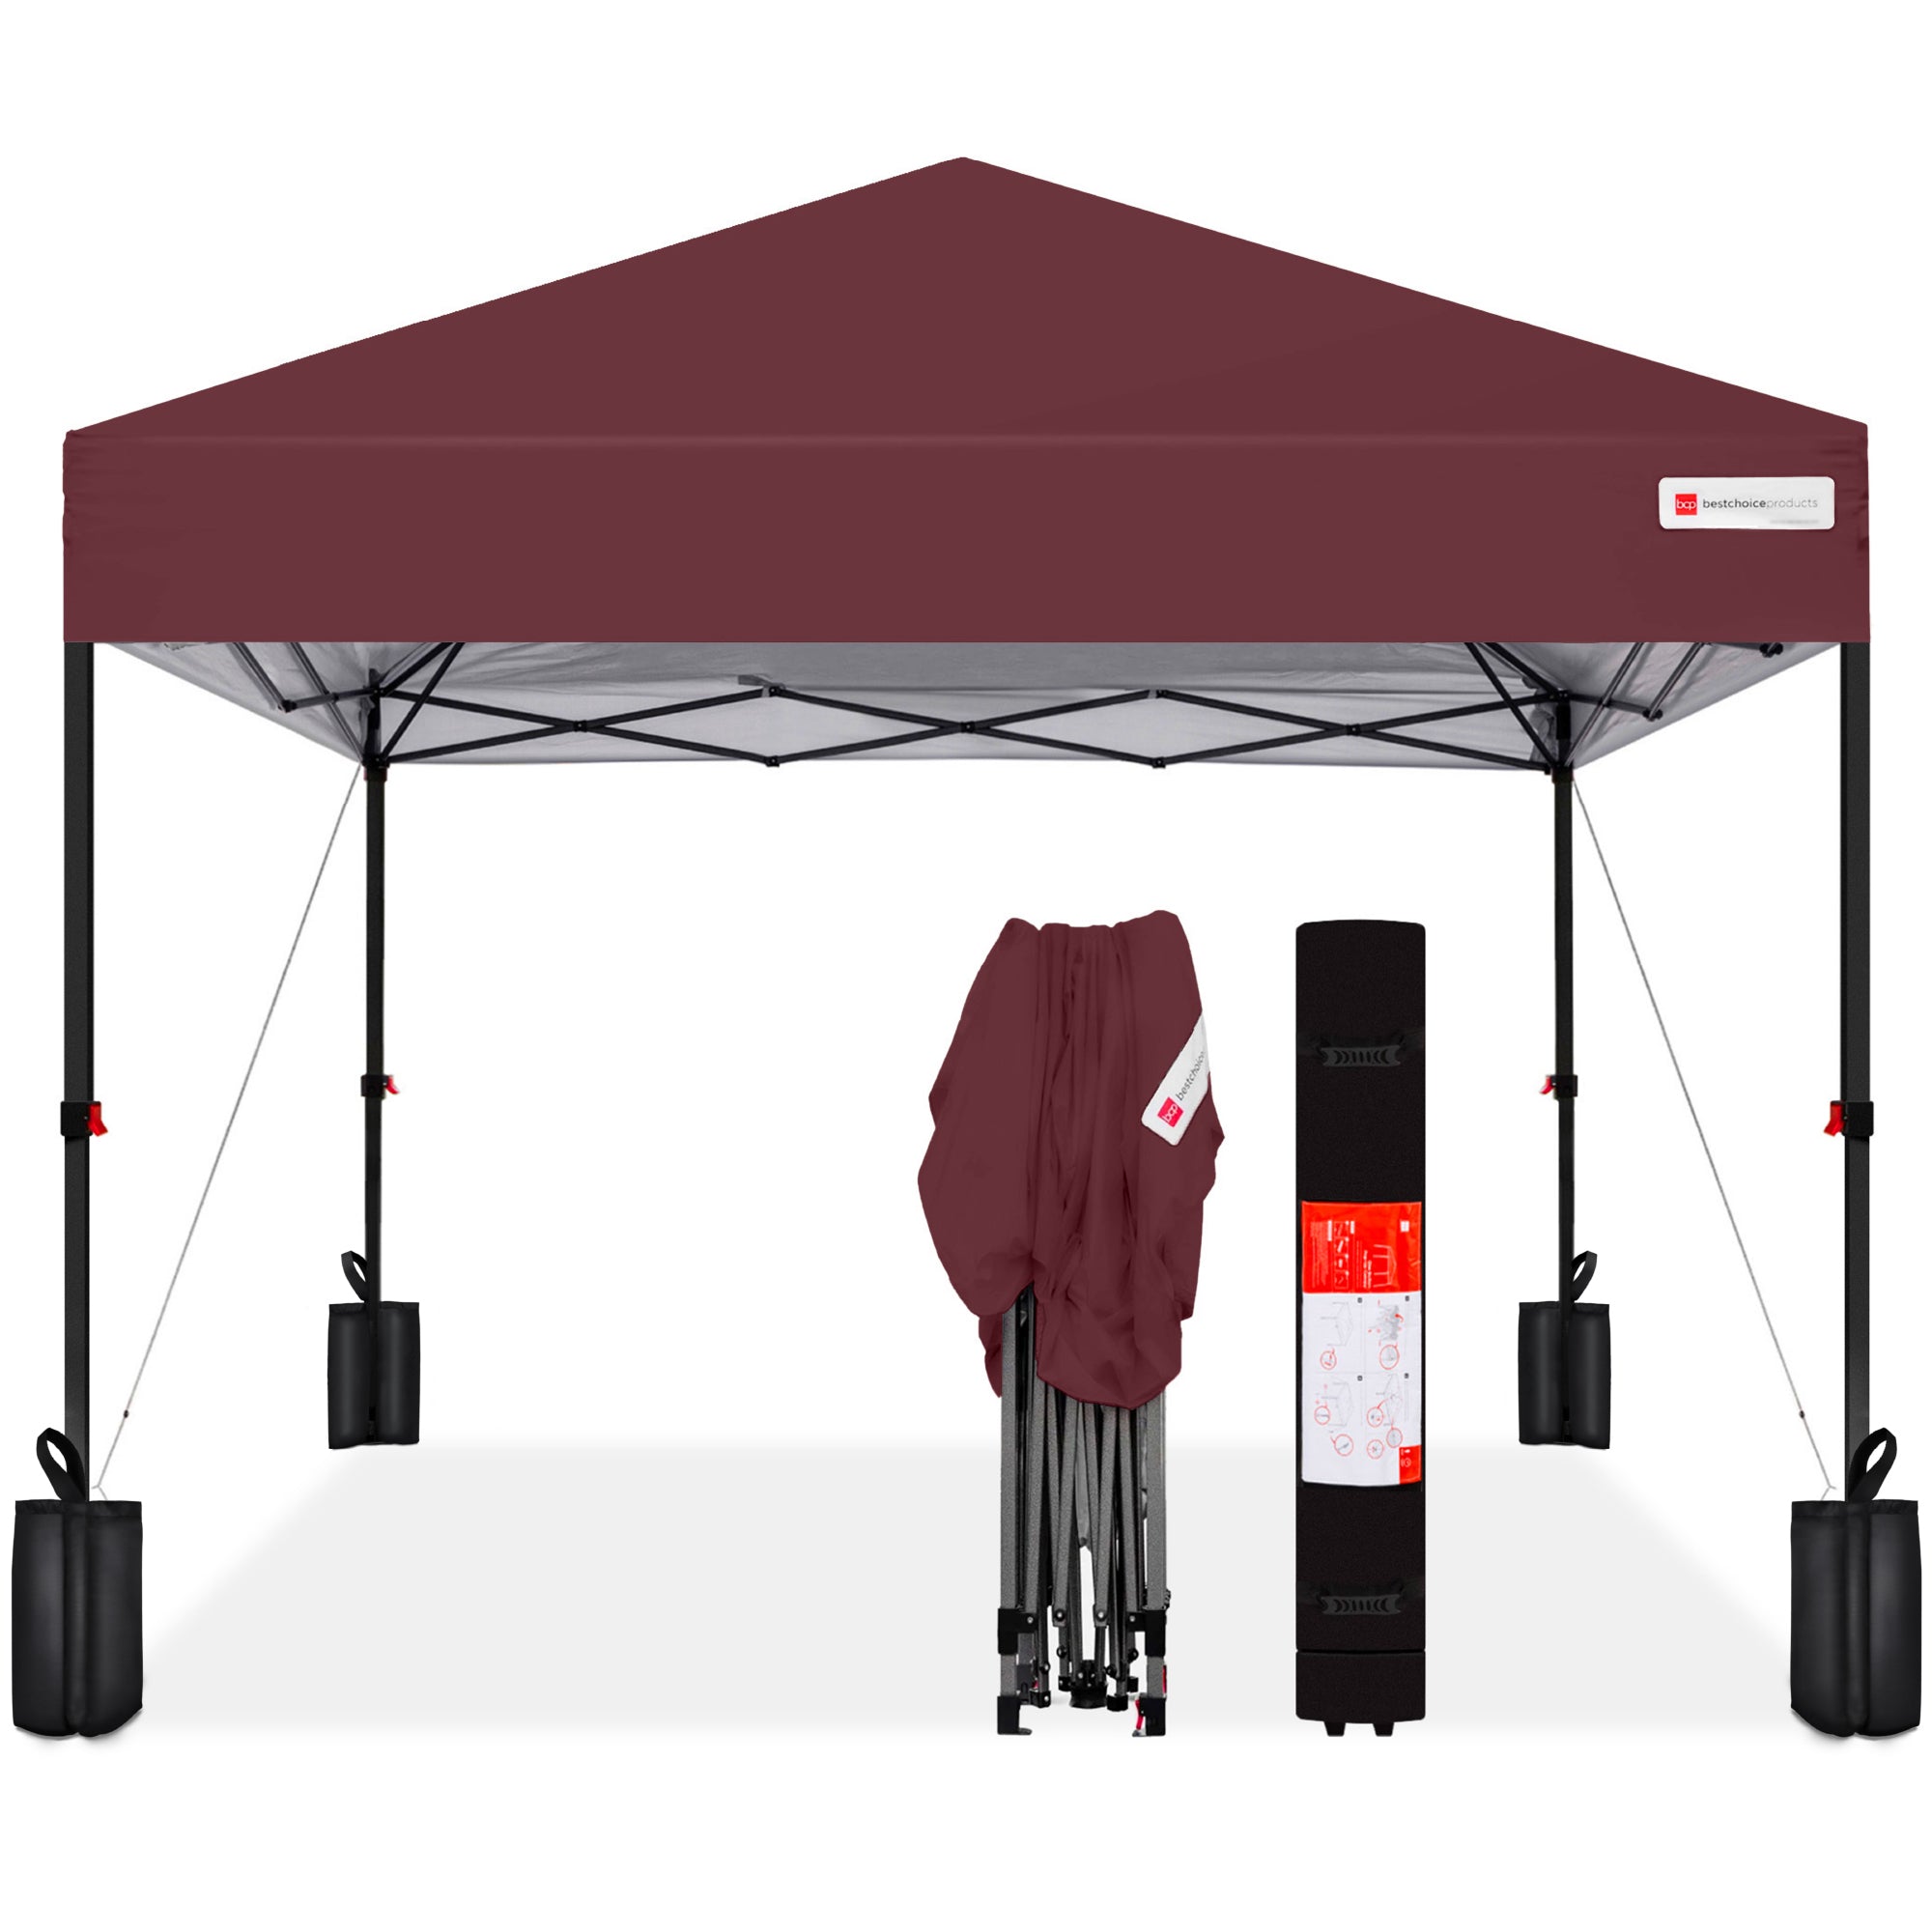 One-Person Setup Instant Pop Up Canopy w/ Case, 4 Weight Bags - 8x8ft